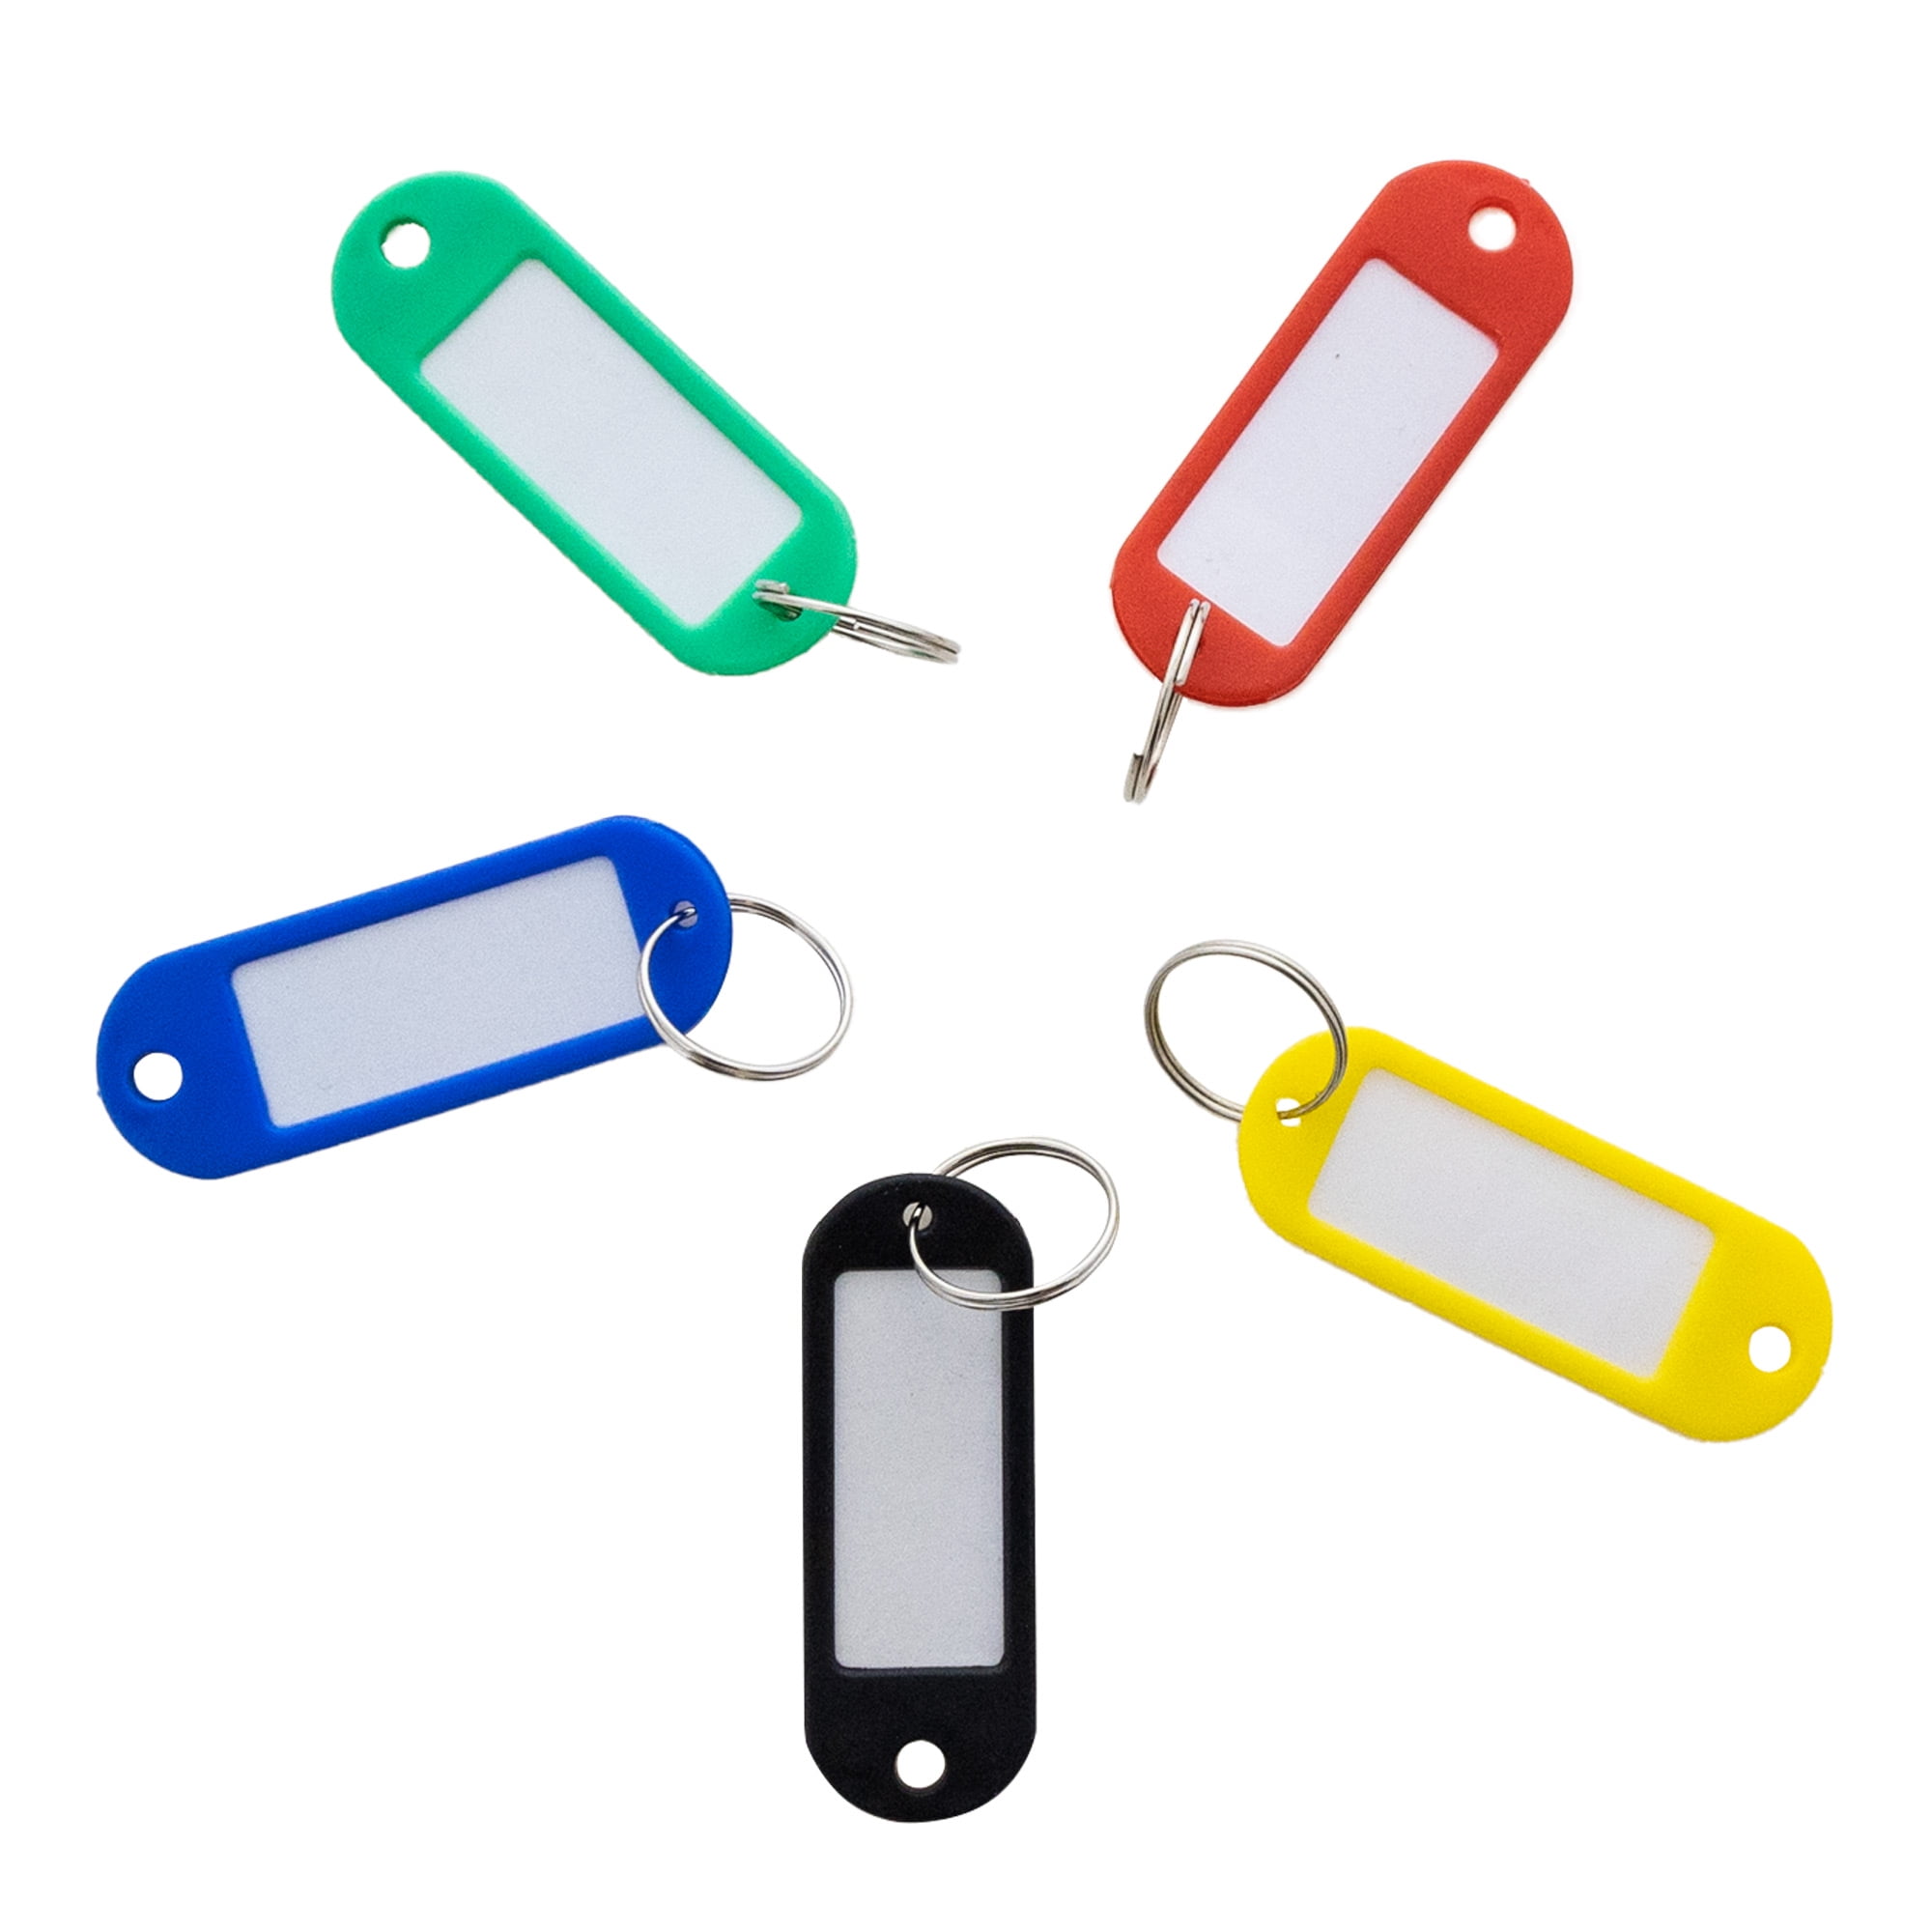 Bazic 2323157 Bazic Key Tag With Label Window - Pack Of 8 - Case Of 24